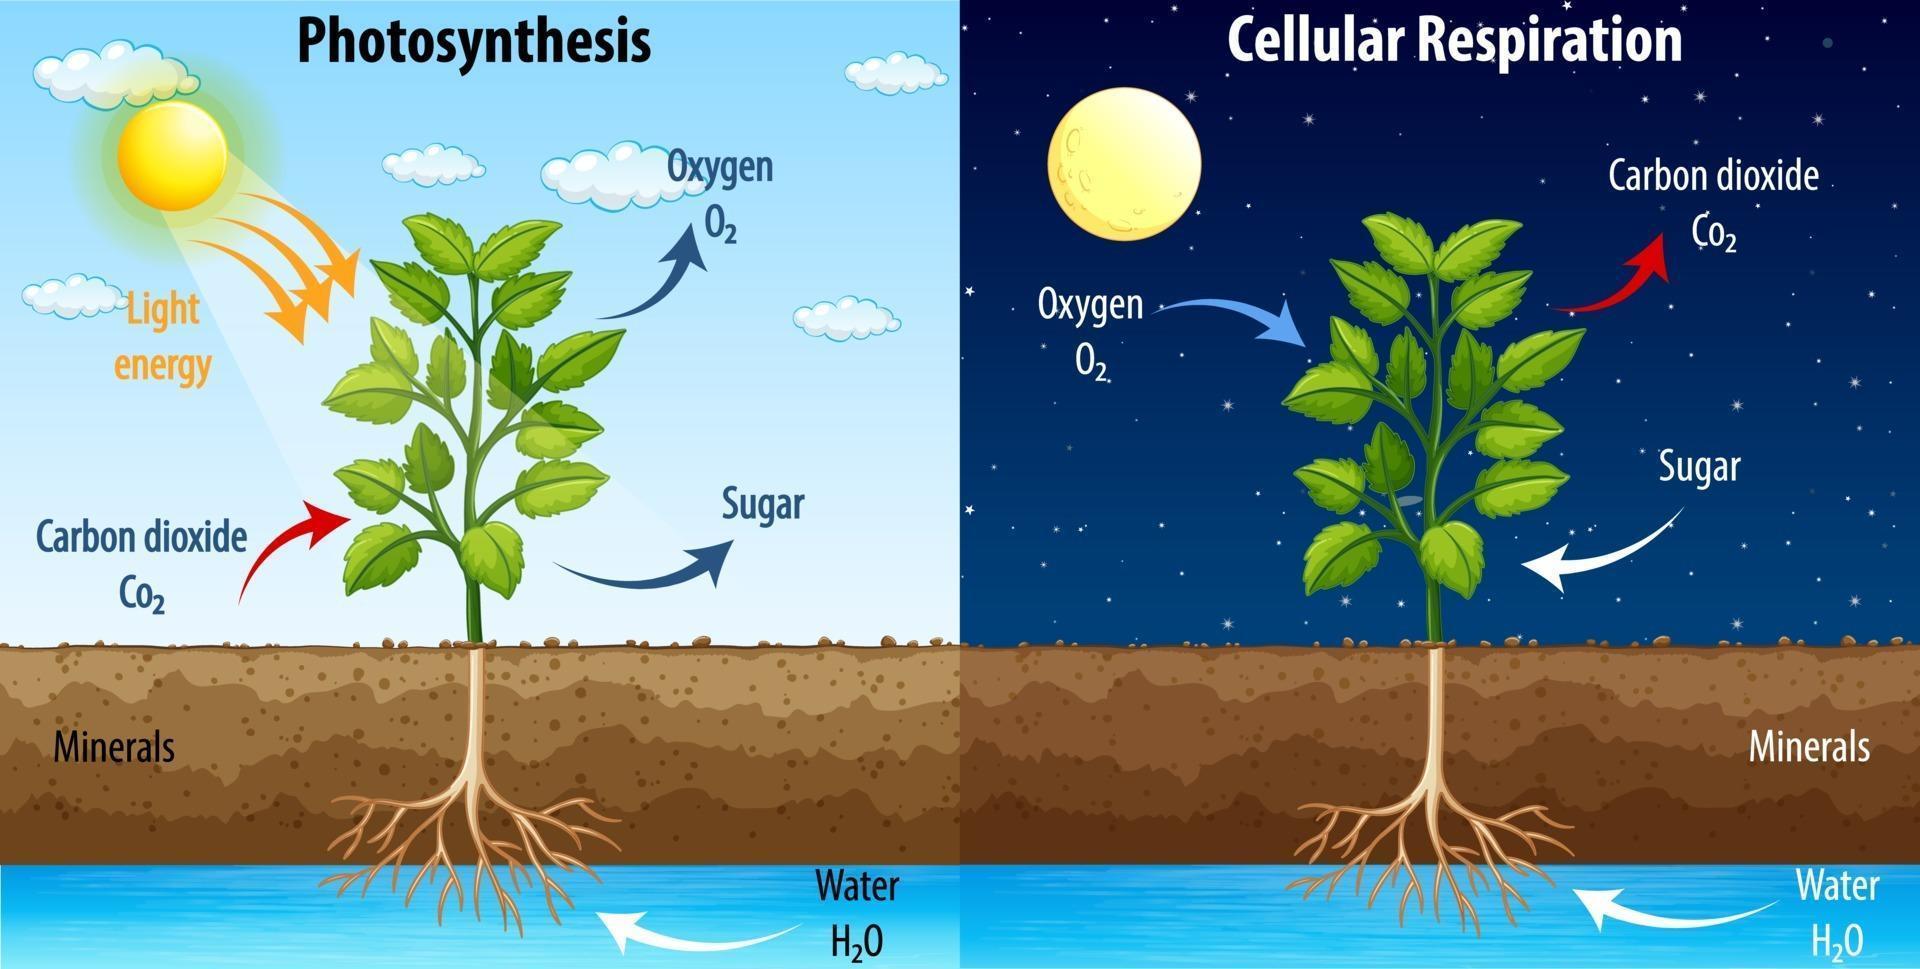 diagram-showing-process-of-photosynthesis-and-cellular-respiration-free-vector